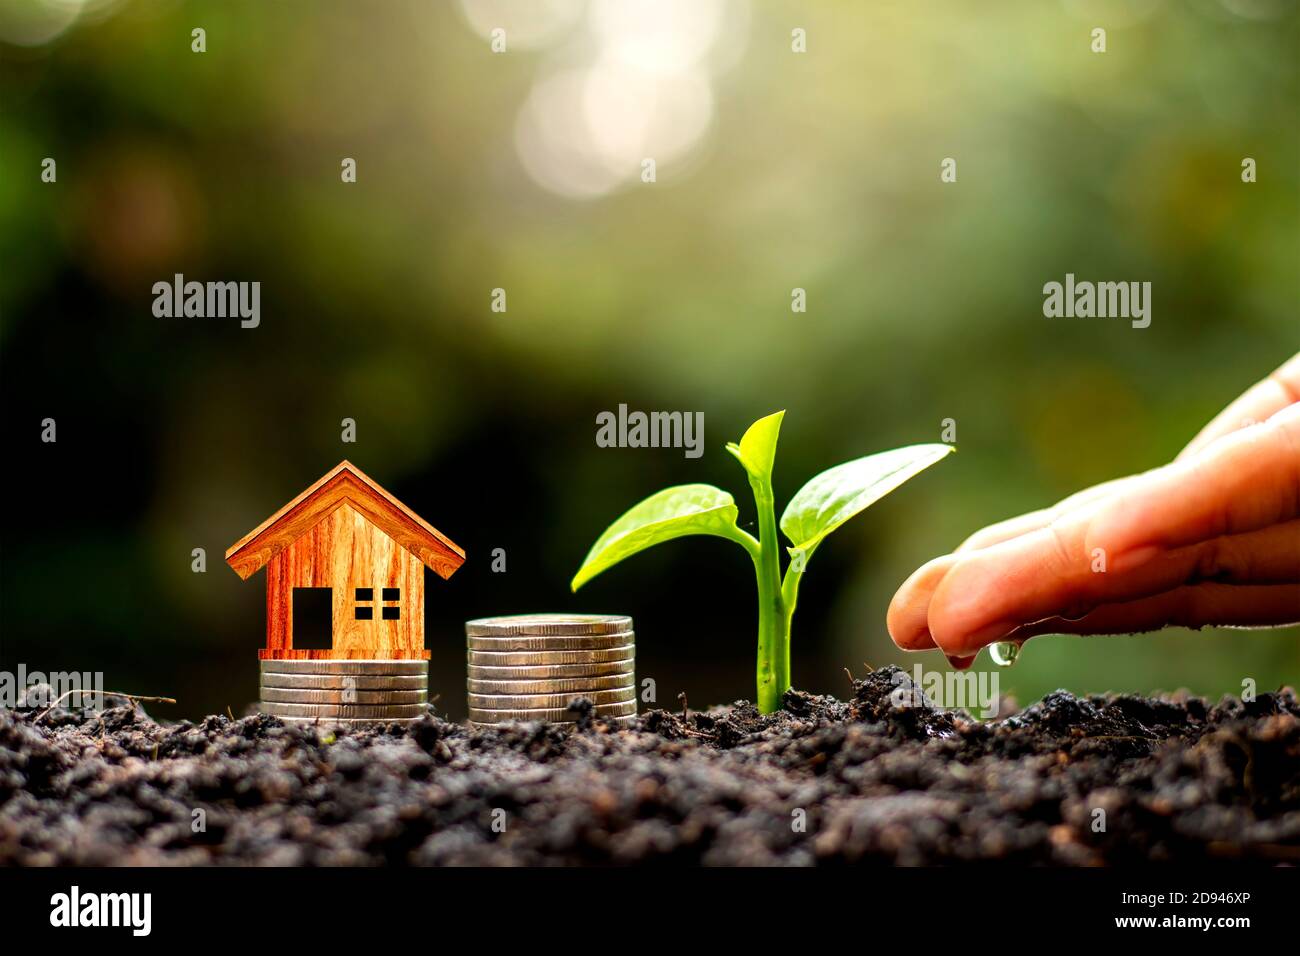 The hands of farmers are watering the plants, including coin-based house models, financial and investment ideas. Stock Photo